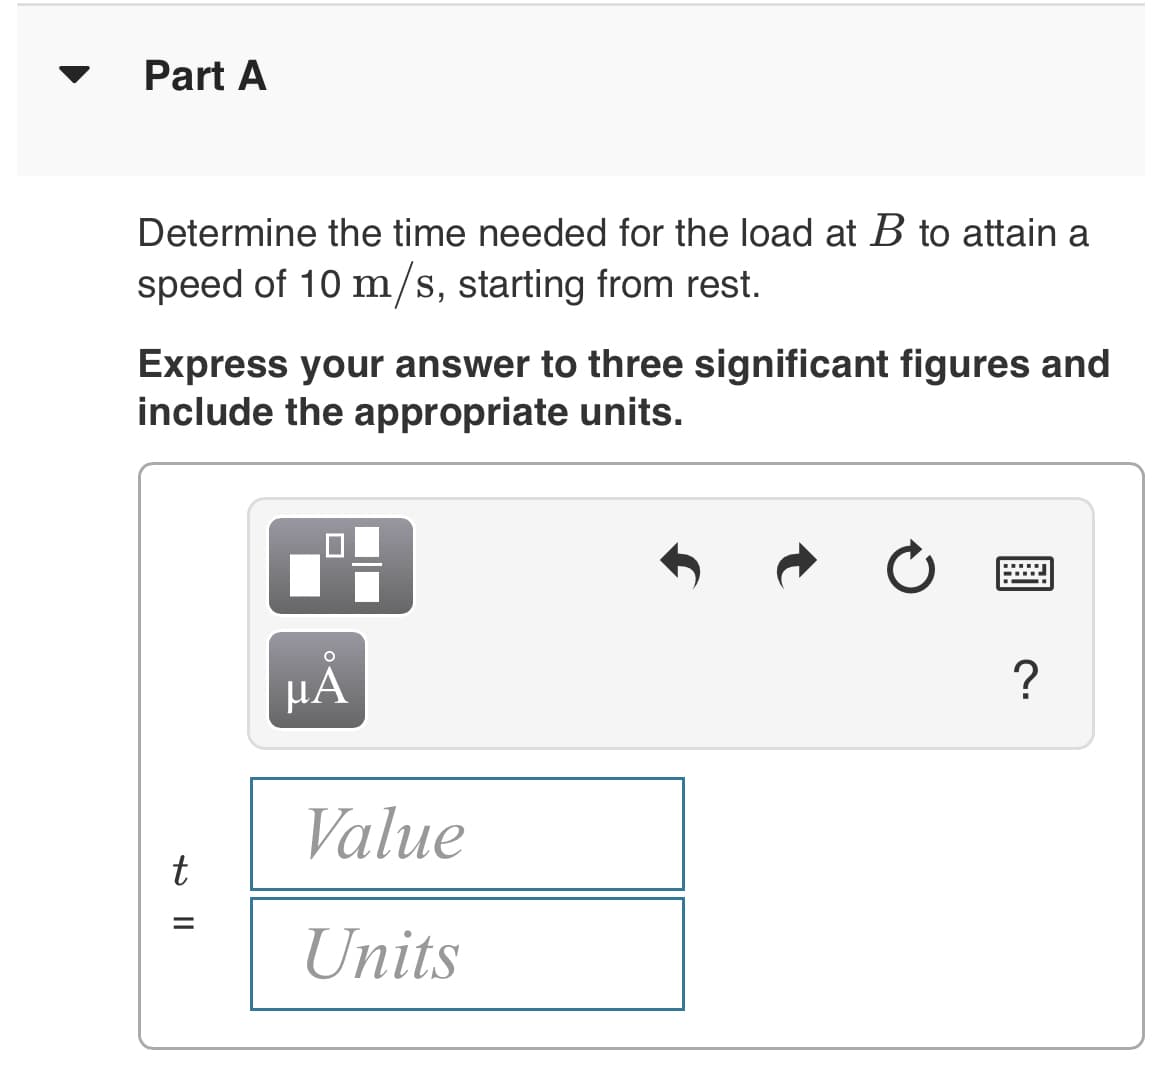 Part A
Determine the time needed for the load at B to attain a
speed of 10 m/s, starting from rest.
Express your answer to three significant figures and
include the appropriate units.
μΑ
?
Value
t
Units
+ ||
